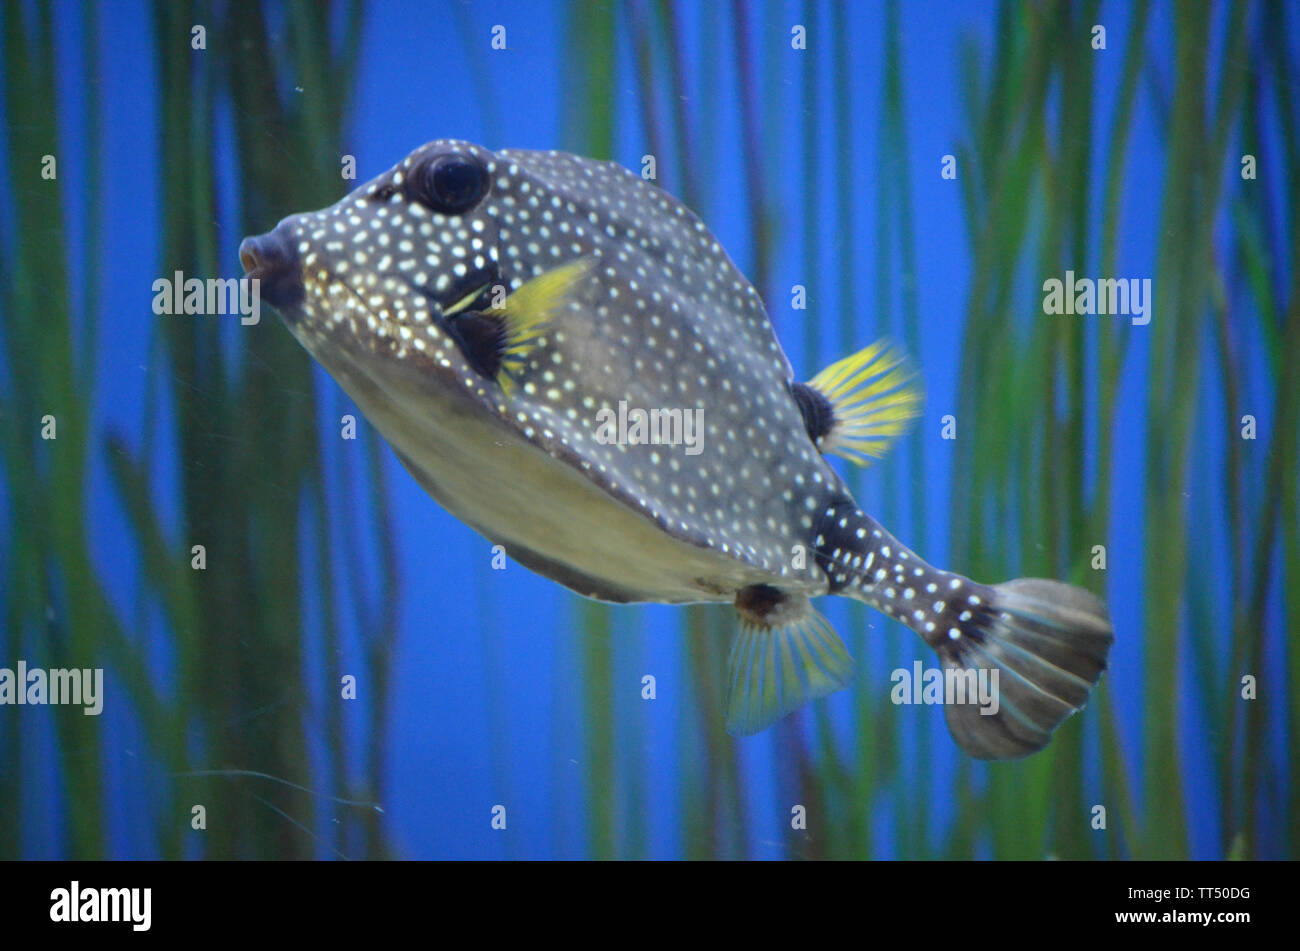 spotted trunkfish featured in foreground with blue and green background Stock Photo